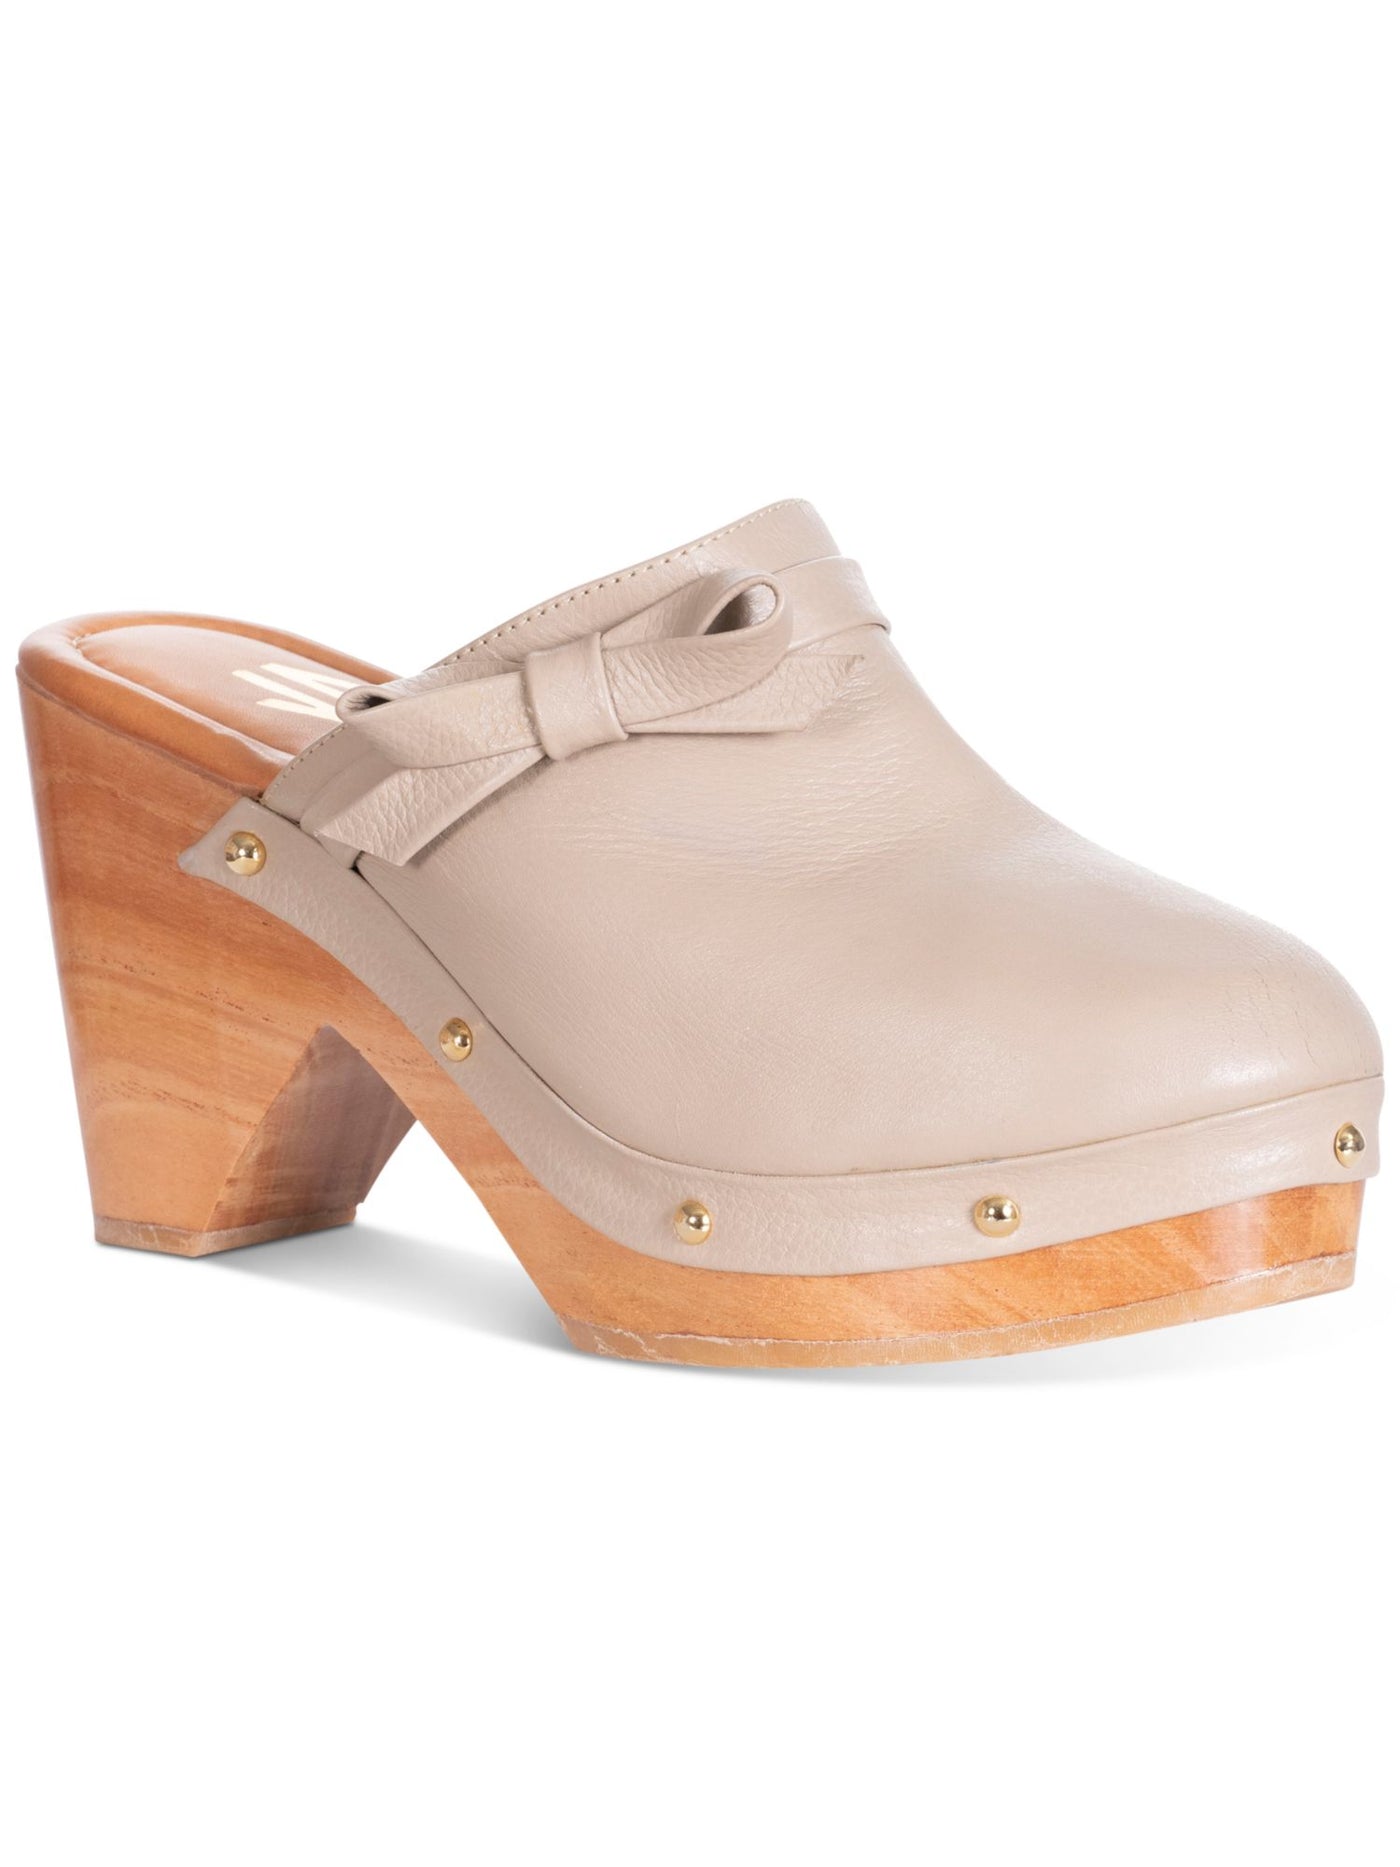 SILVIA COBOS Womens Beige 1" Platform Bow Studded Daily Round Toe Sculpted Heel Slip On Leather Clogs Shoes 8